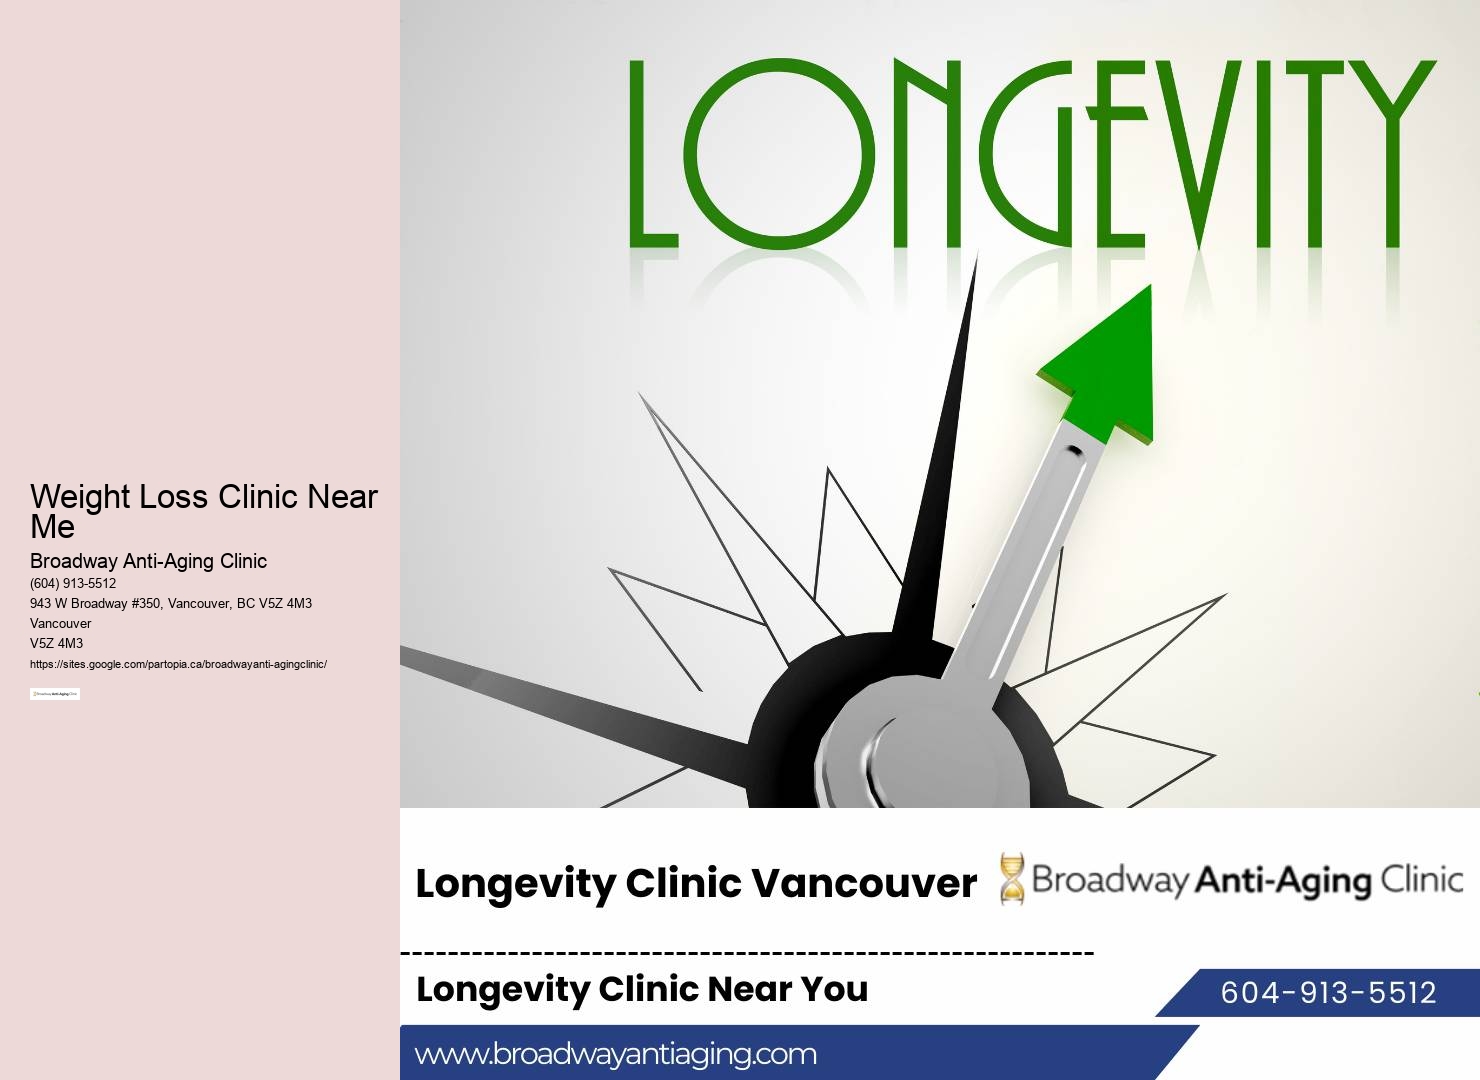 Leading Vancouver Clinic Near Me